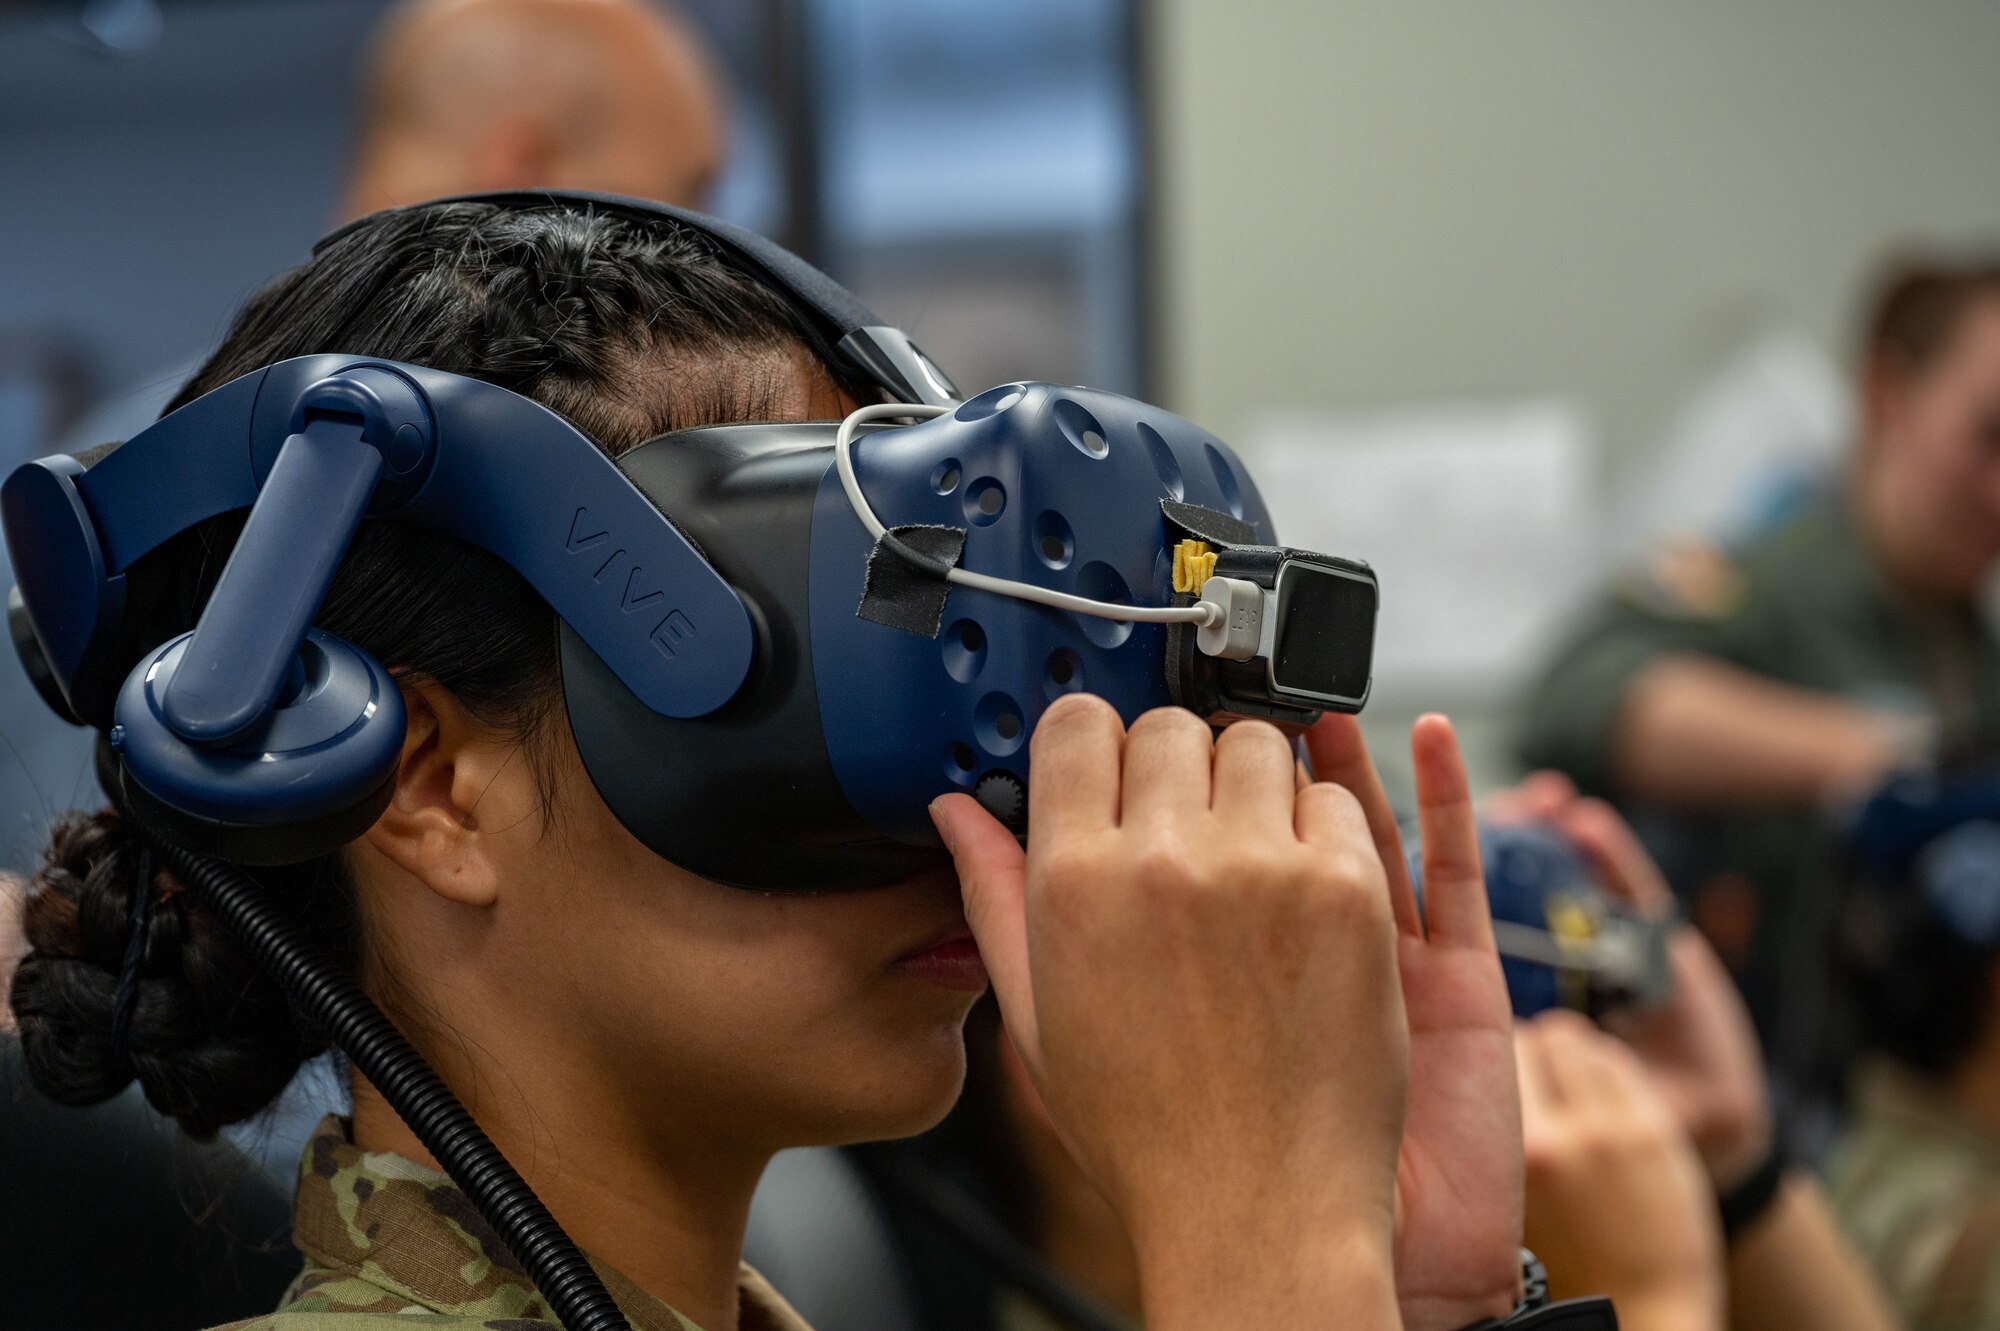 Air Force ROTC Academy Cadet Angelica Lumactod learns how to fly an F-15E Strike Eagle in a virtual reality training simulation at Seymour Johnson Air Force Base, North Carolina, August 3, 2023. This was part of a week-long tour aimed to enhance the cadets’ knowledge of Air Force career fields and a closer look at the base’s mission. (U.S. Air Force photo by Airman 1st Class Leighton Lucero)